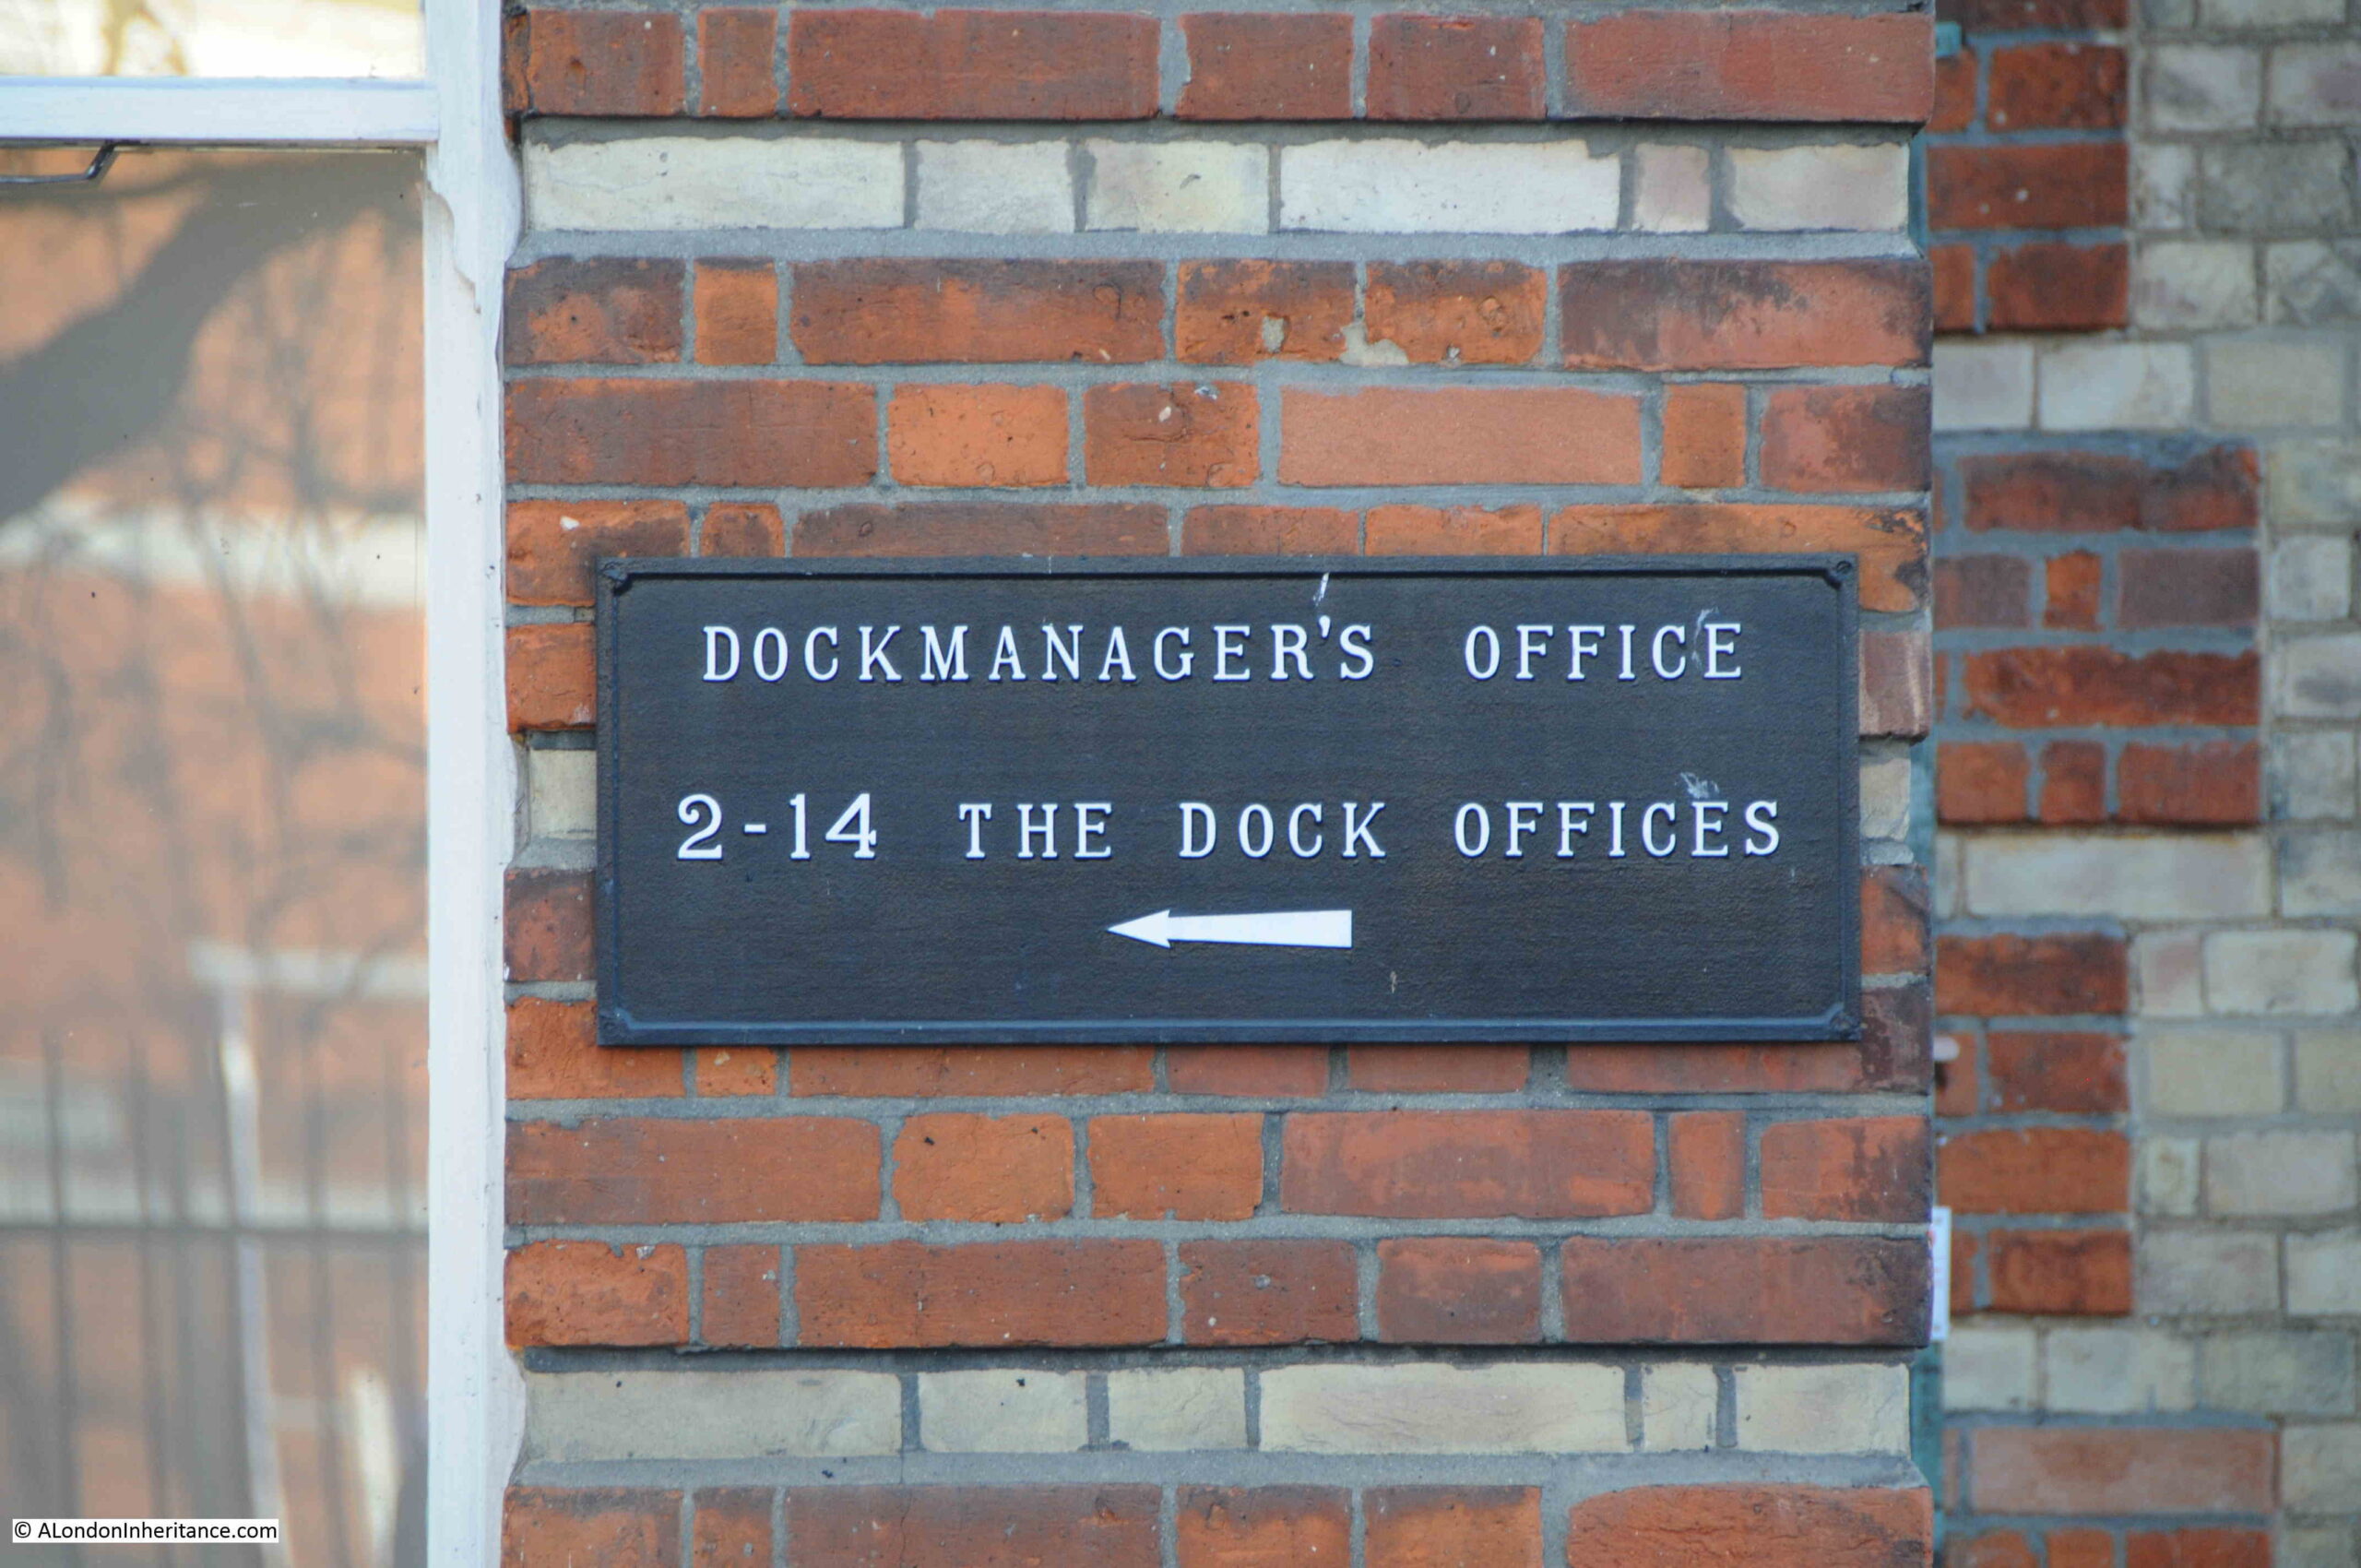 Dock Manager's Offices